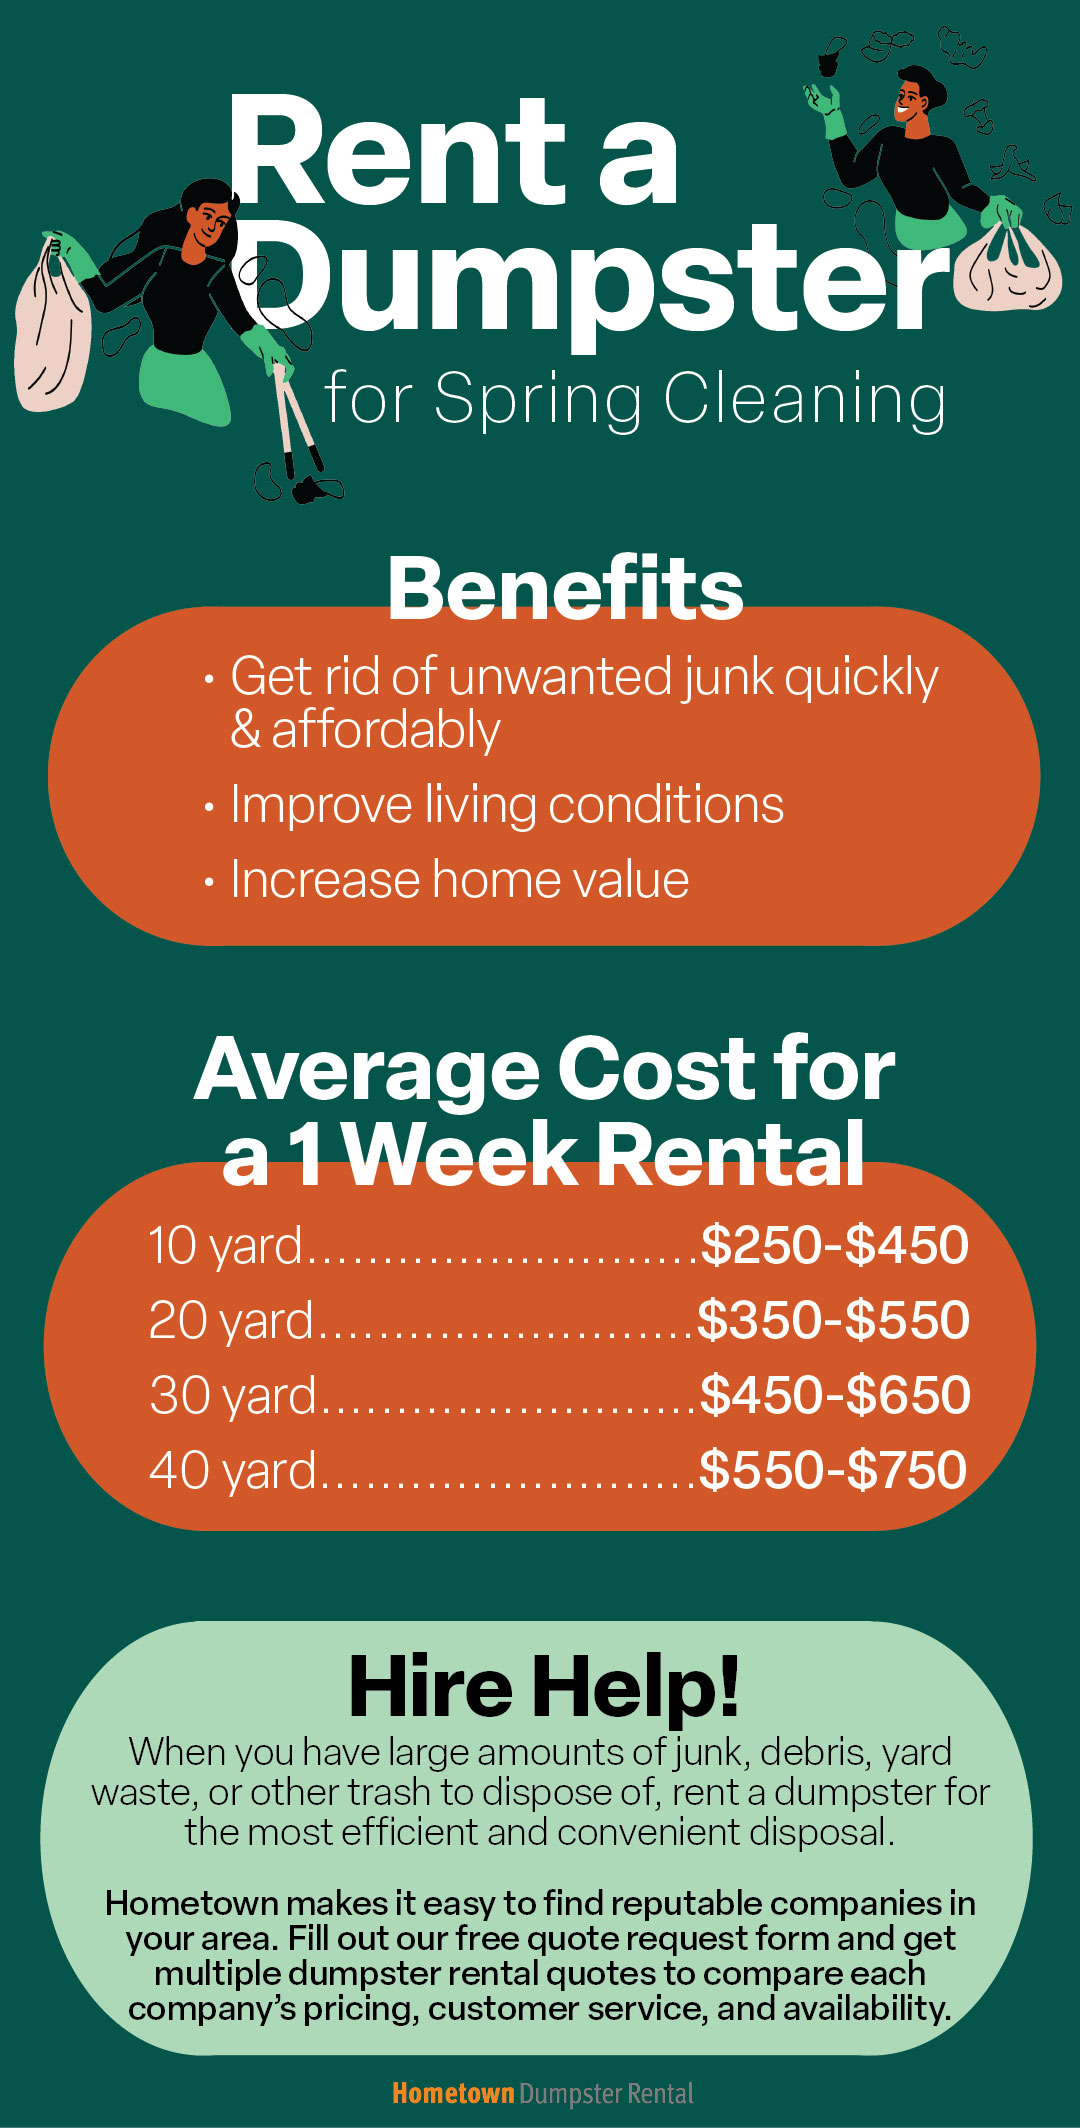 Rent a Dumpster for Spring Cleaning Infographic